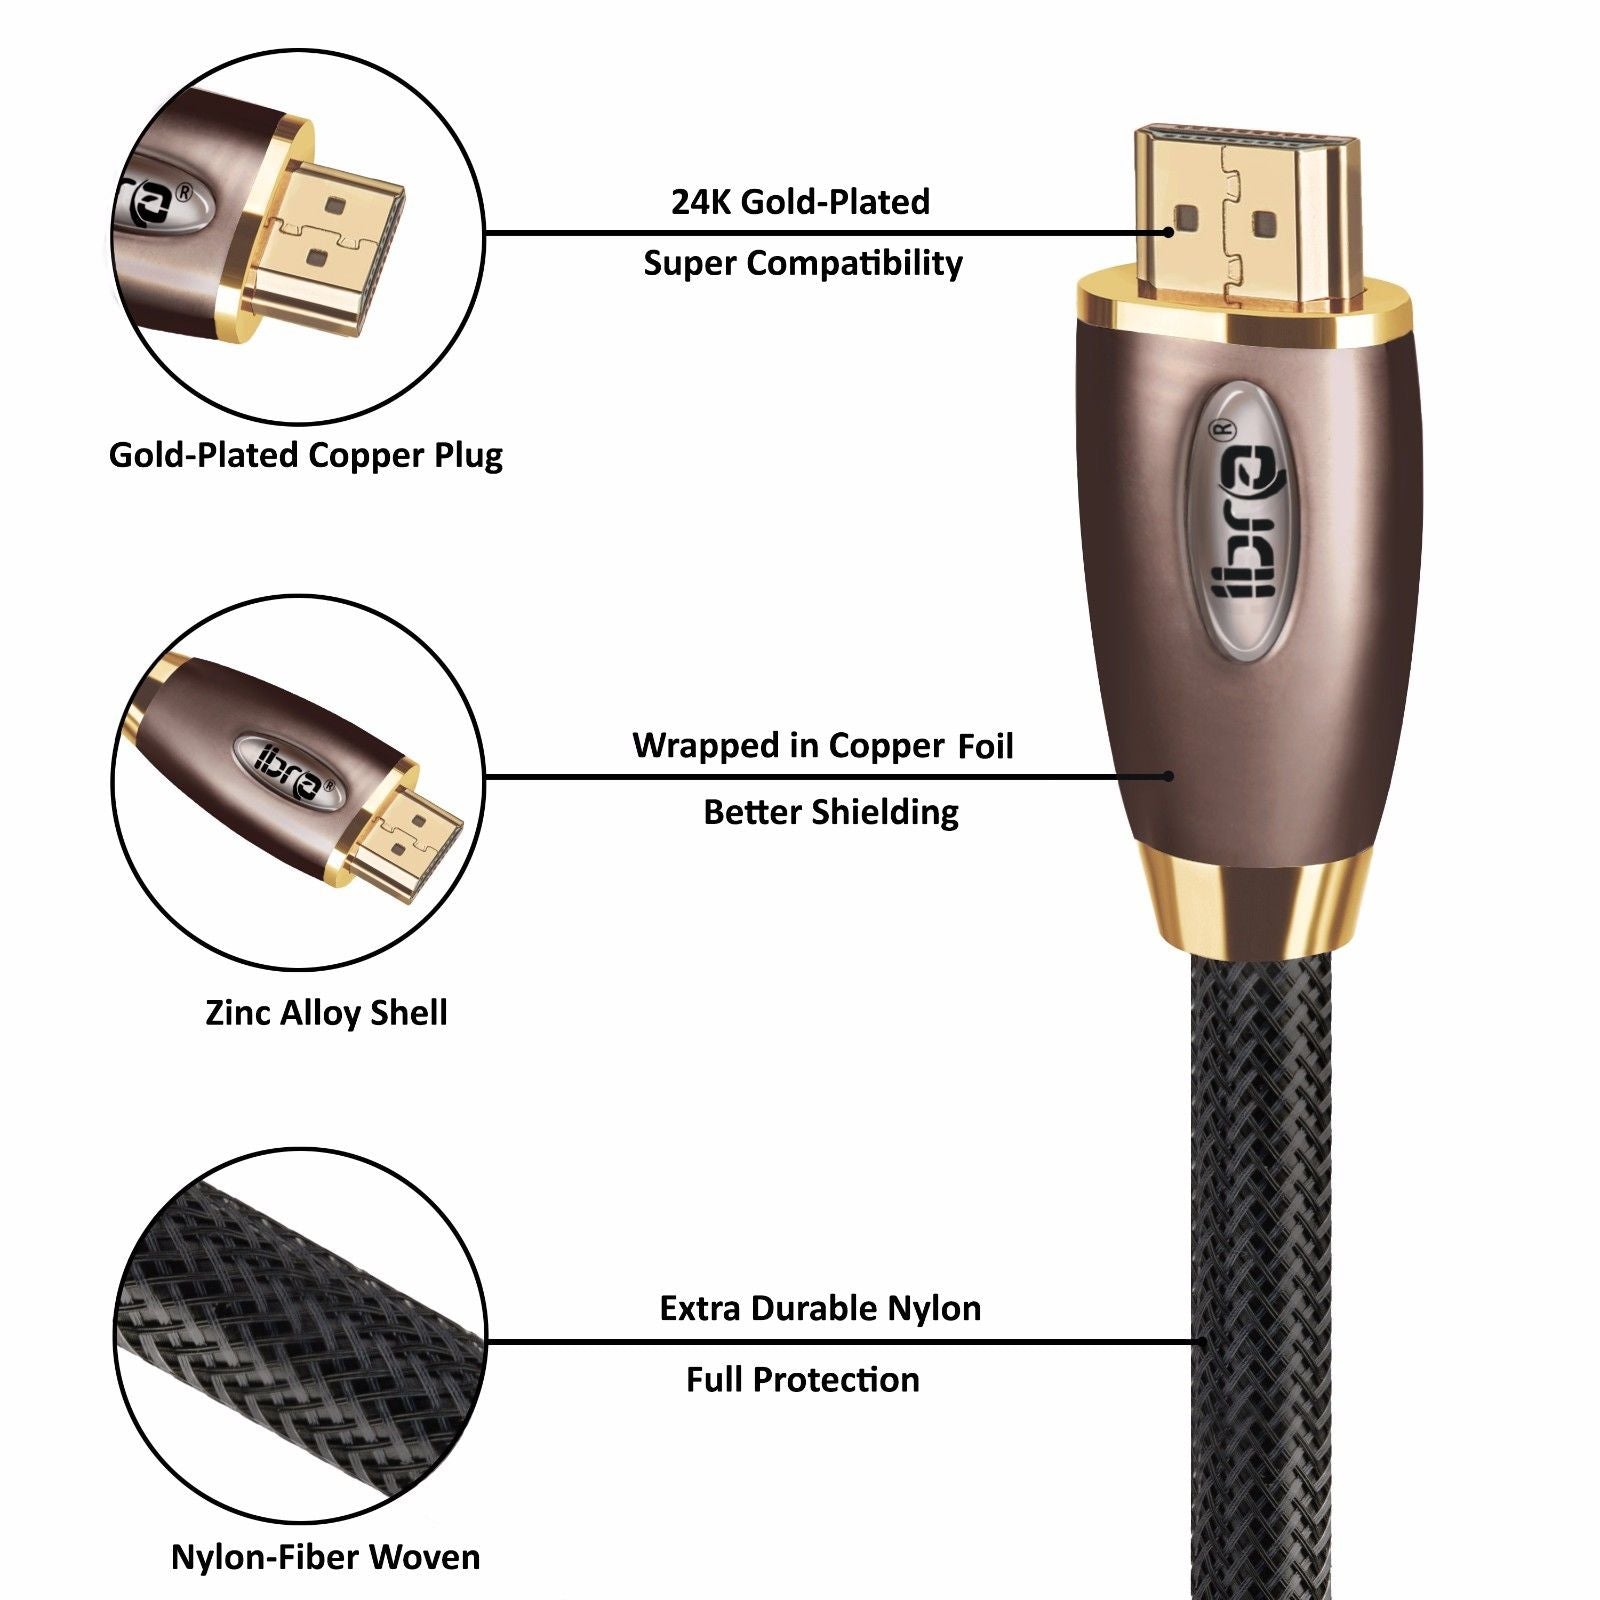 HDMI Cable 15M - 4K UHD HDMI 2.0(4K) Ready -18Gbps-28AWG Braided Cord -Gold Plated Connectors -Ethernet,Audio Return -Video 4K 2160p,HD 1080p,3D -Xbox PlayStation PS3 PS4 PC Apple TV -IBRA RED